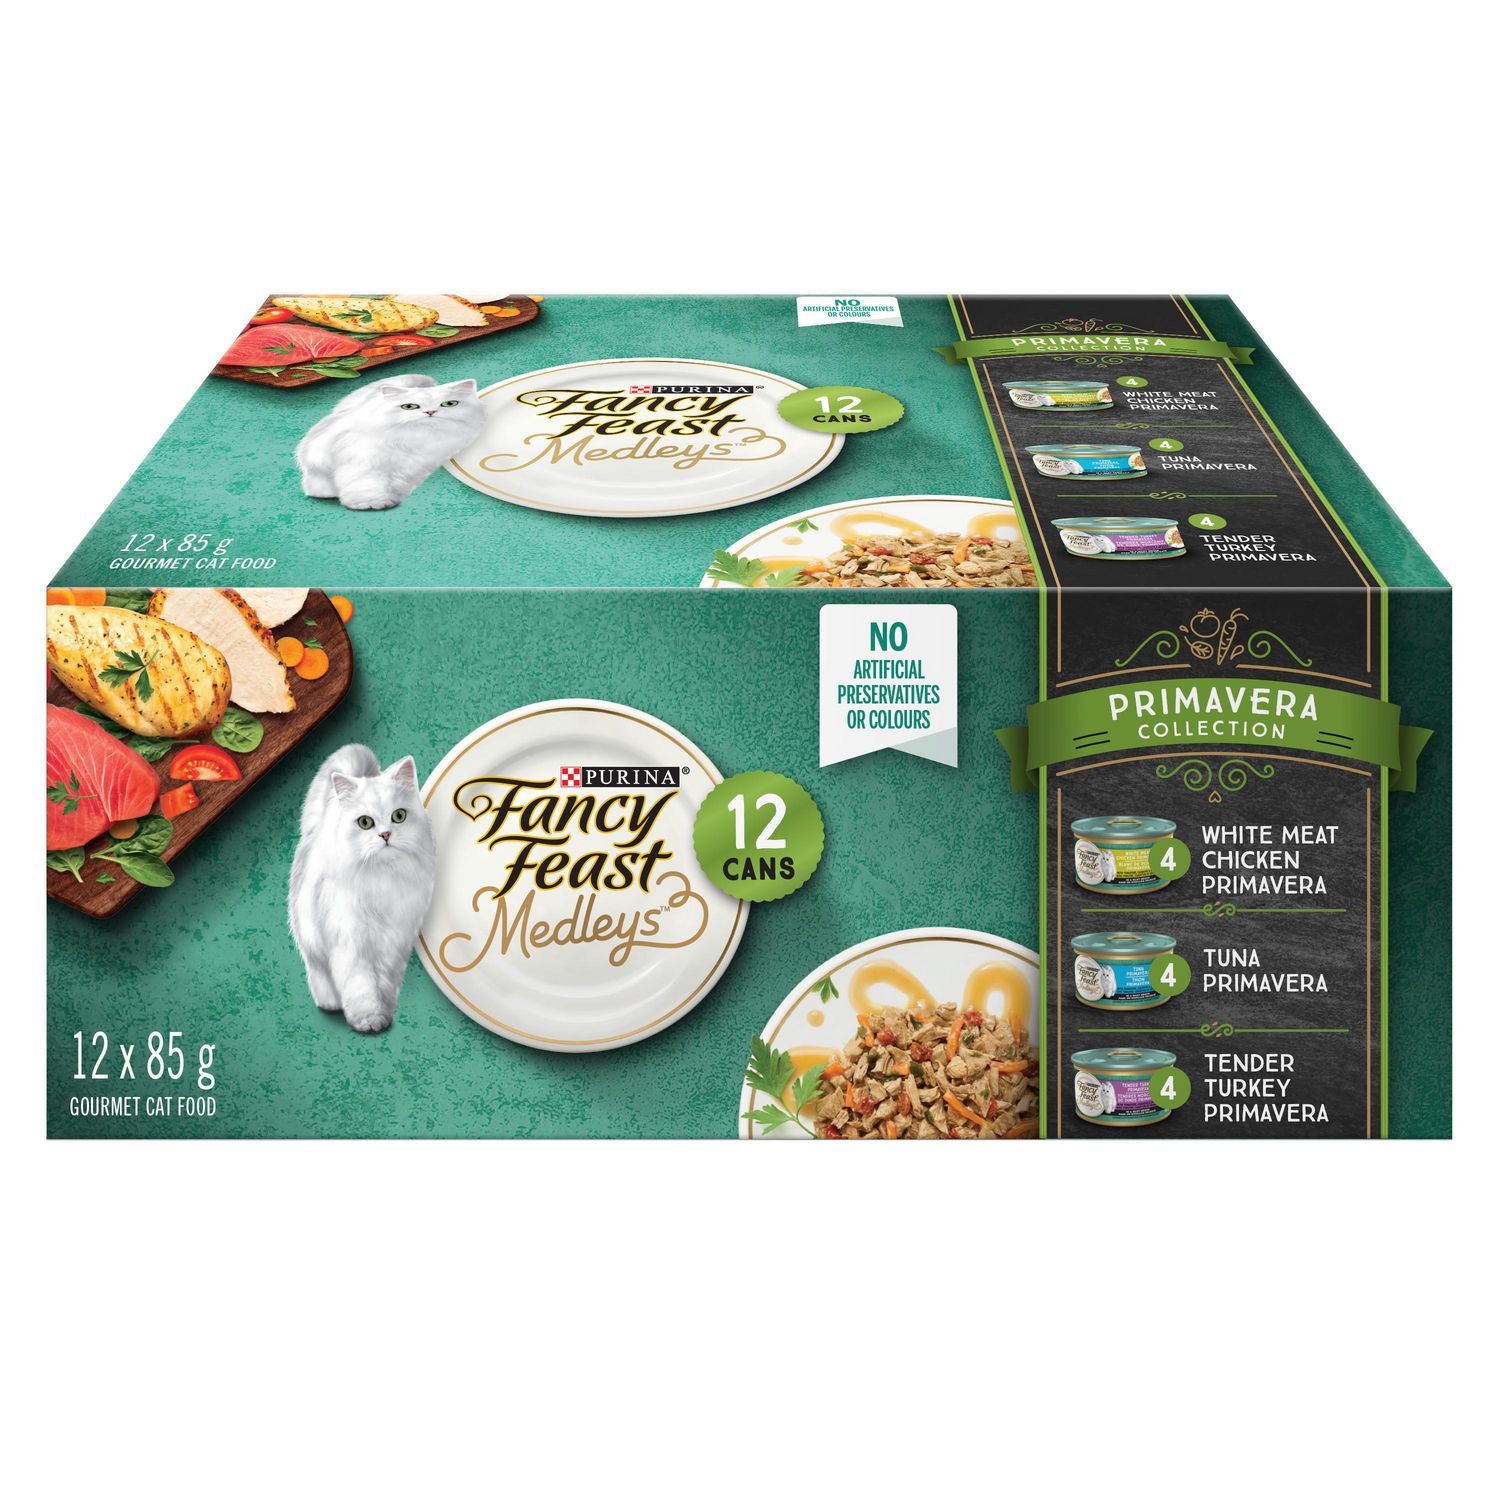 cheapest price for fancy feast cat food